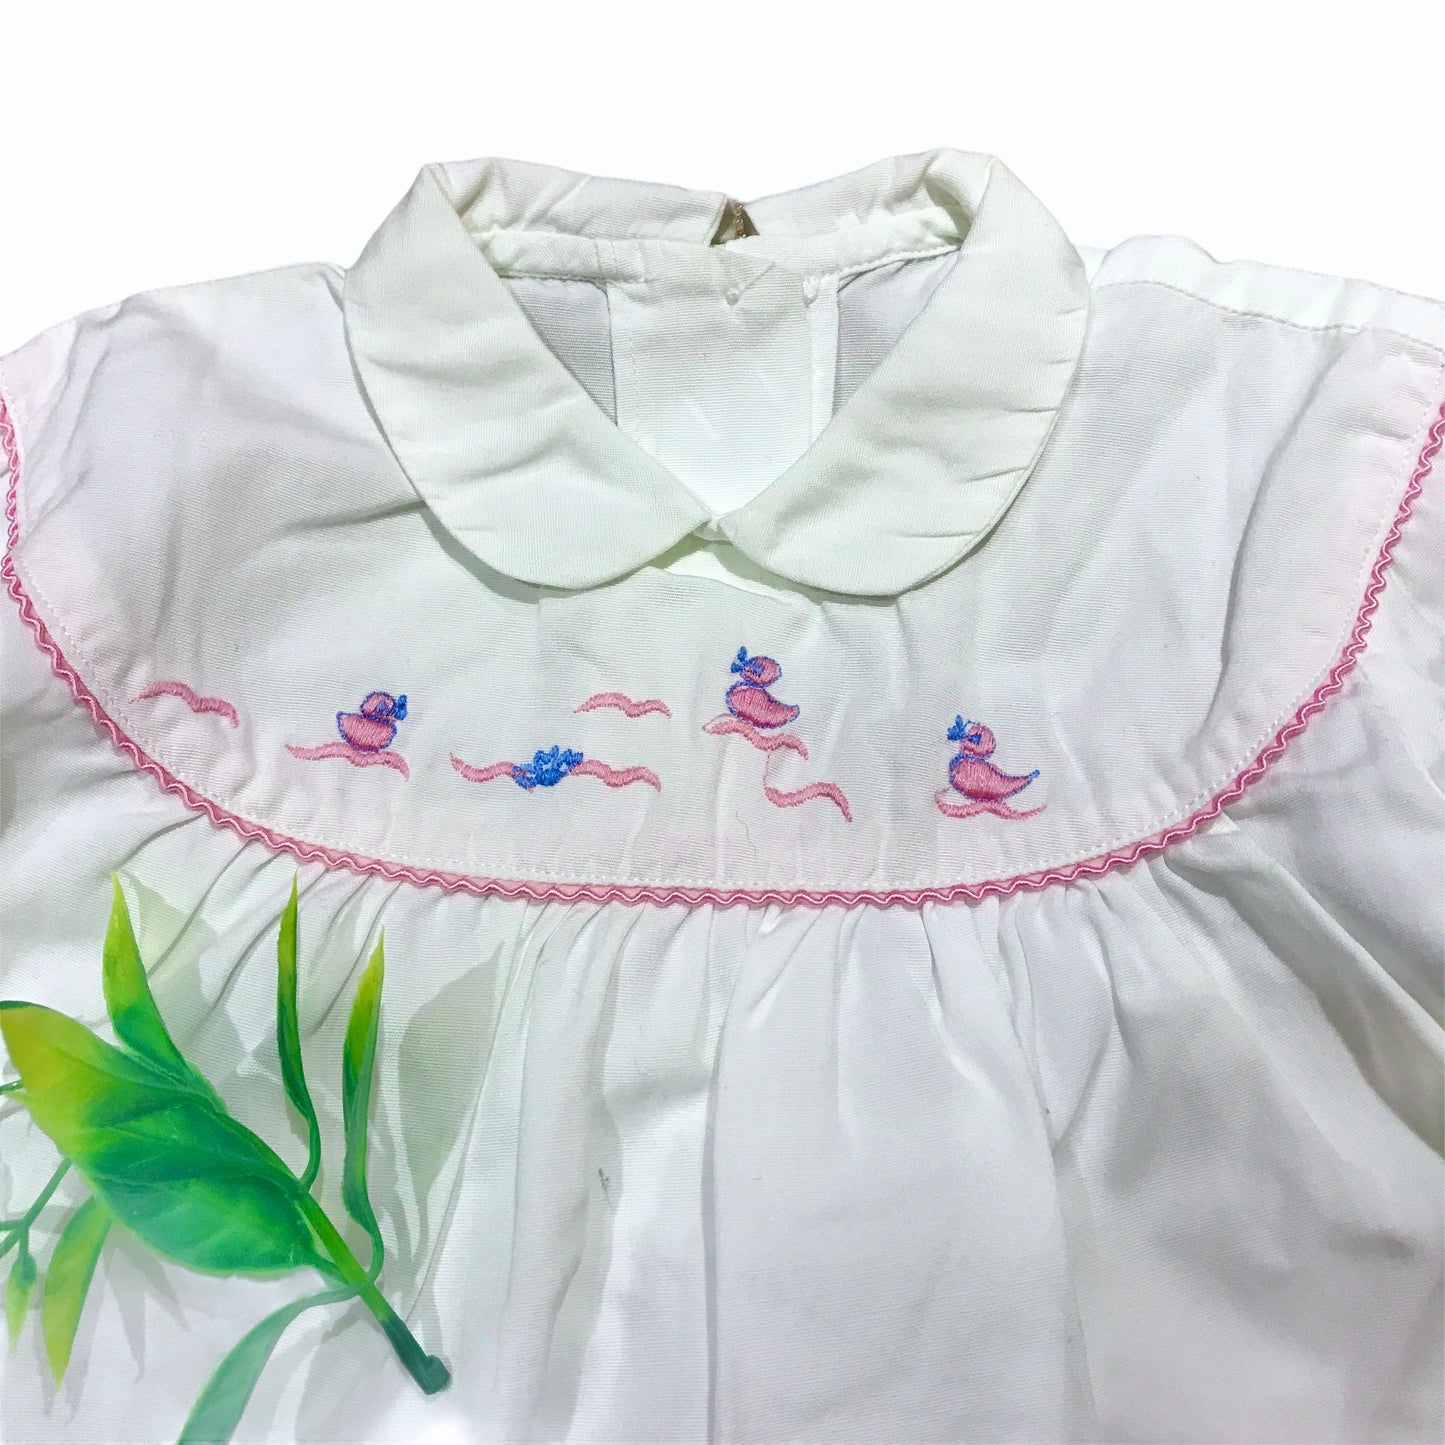 Vintage 60's White "Ducklings" Embroidered Long Sleeve Top / Shirt / Blouse  6-9 Months